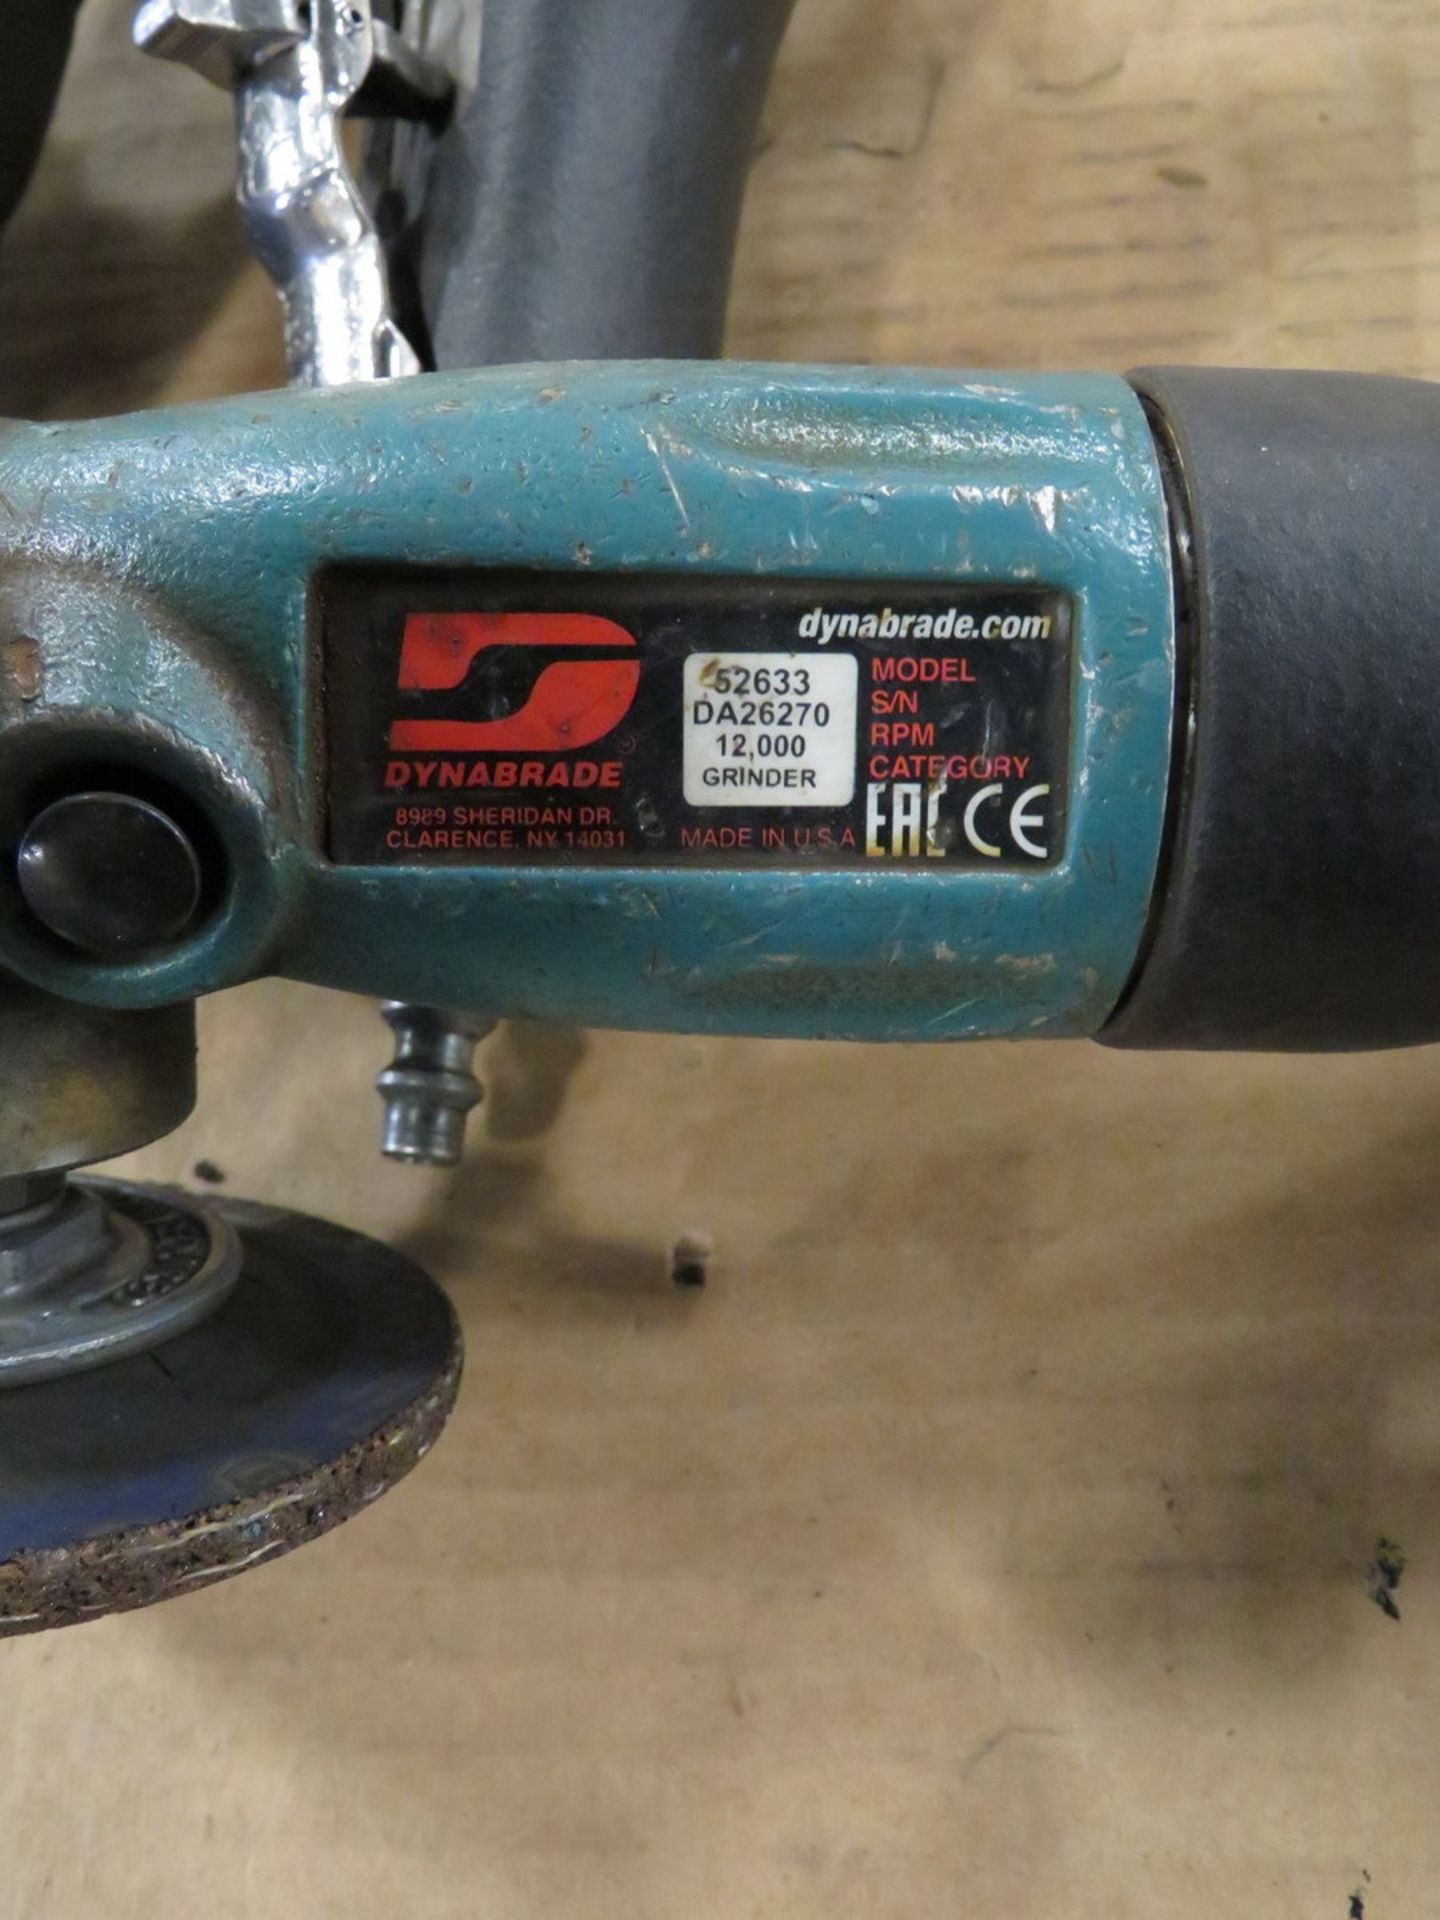 Dynablade 52633 Right Angle Pneumatic Grinder - Image 2 of 2